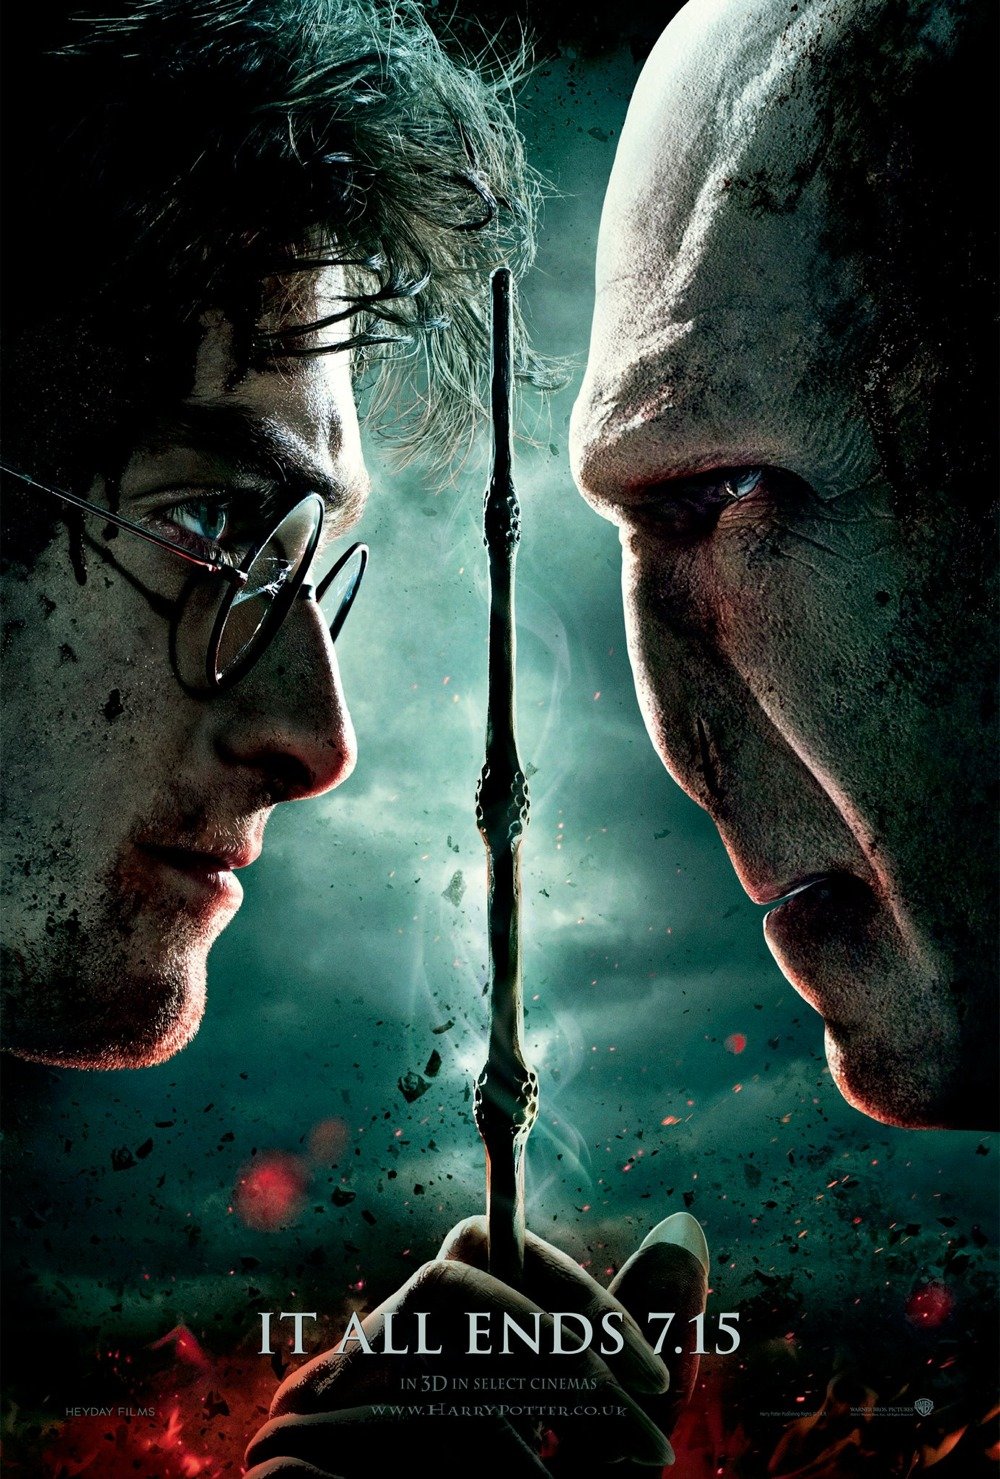 harry potter movies deathly hallows part 2 download free